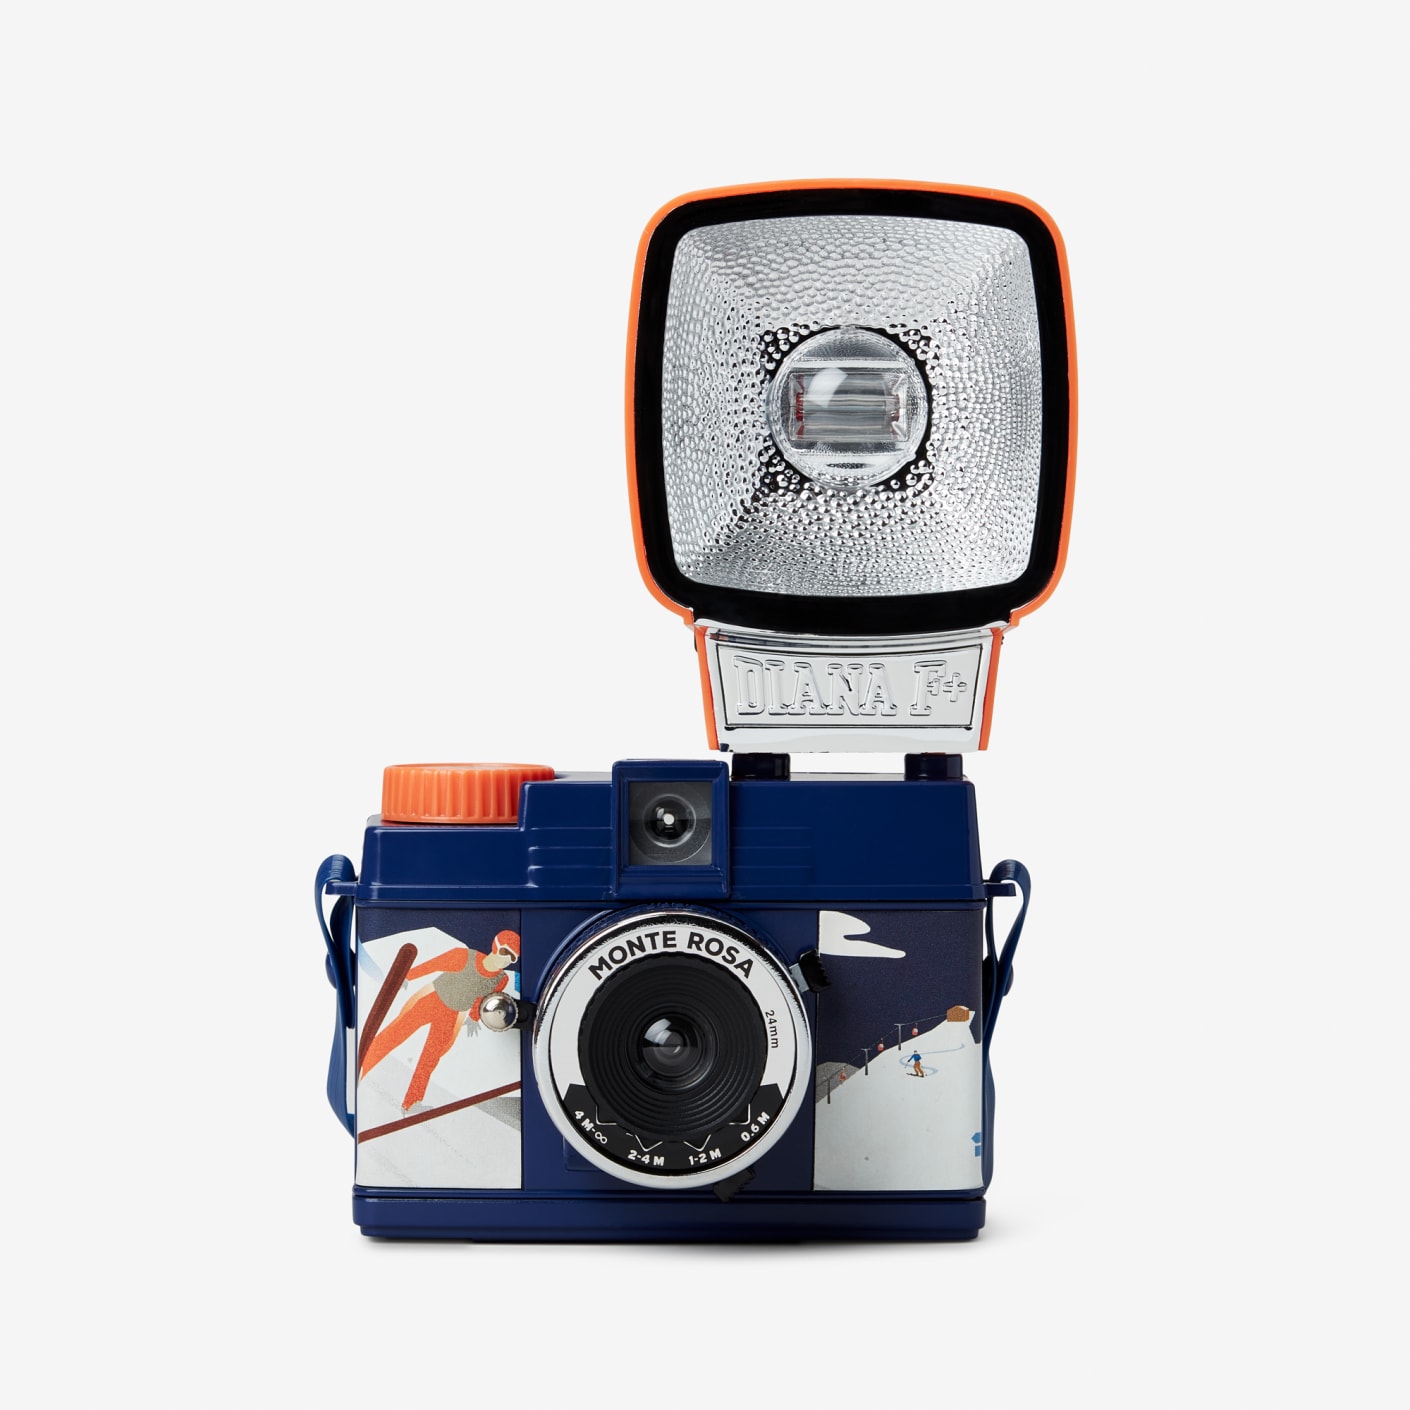 LOMOGRAPHY MONTE ROSA Limited Special Edition Diana Mini-